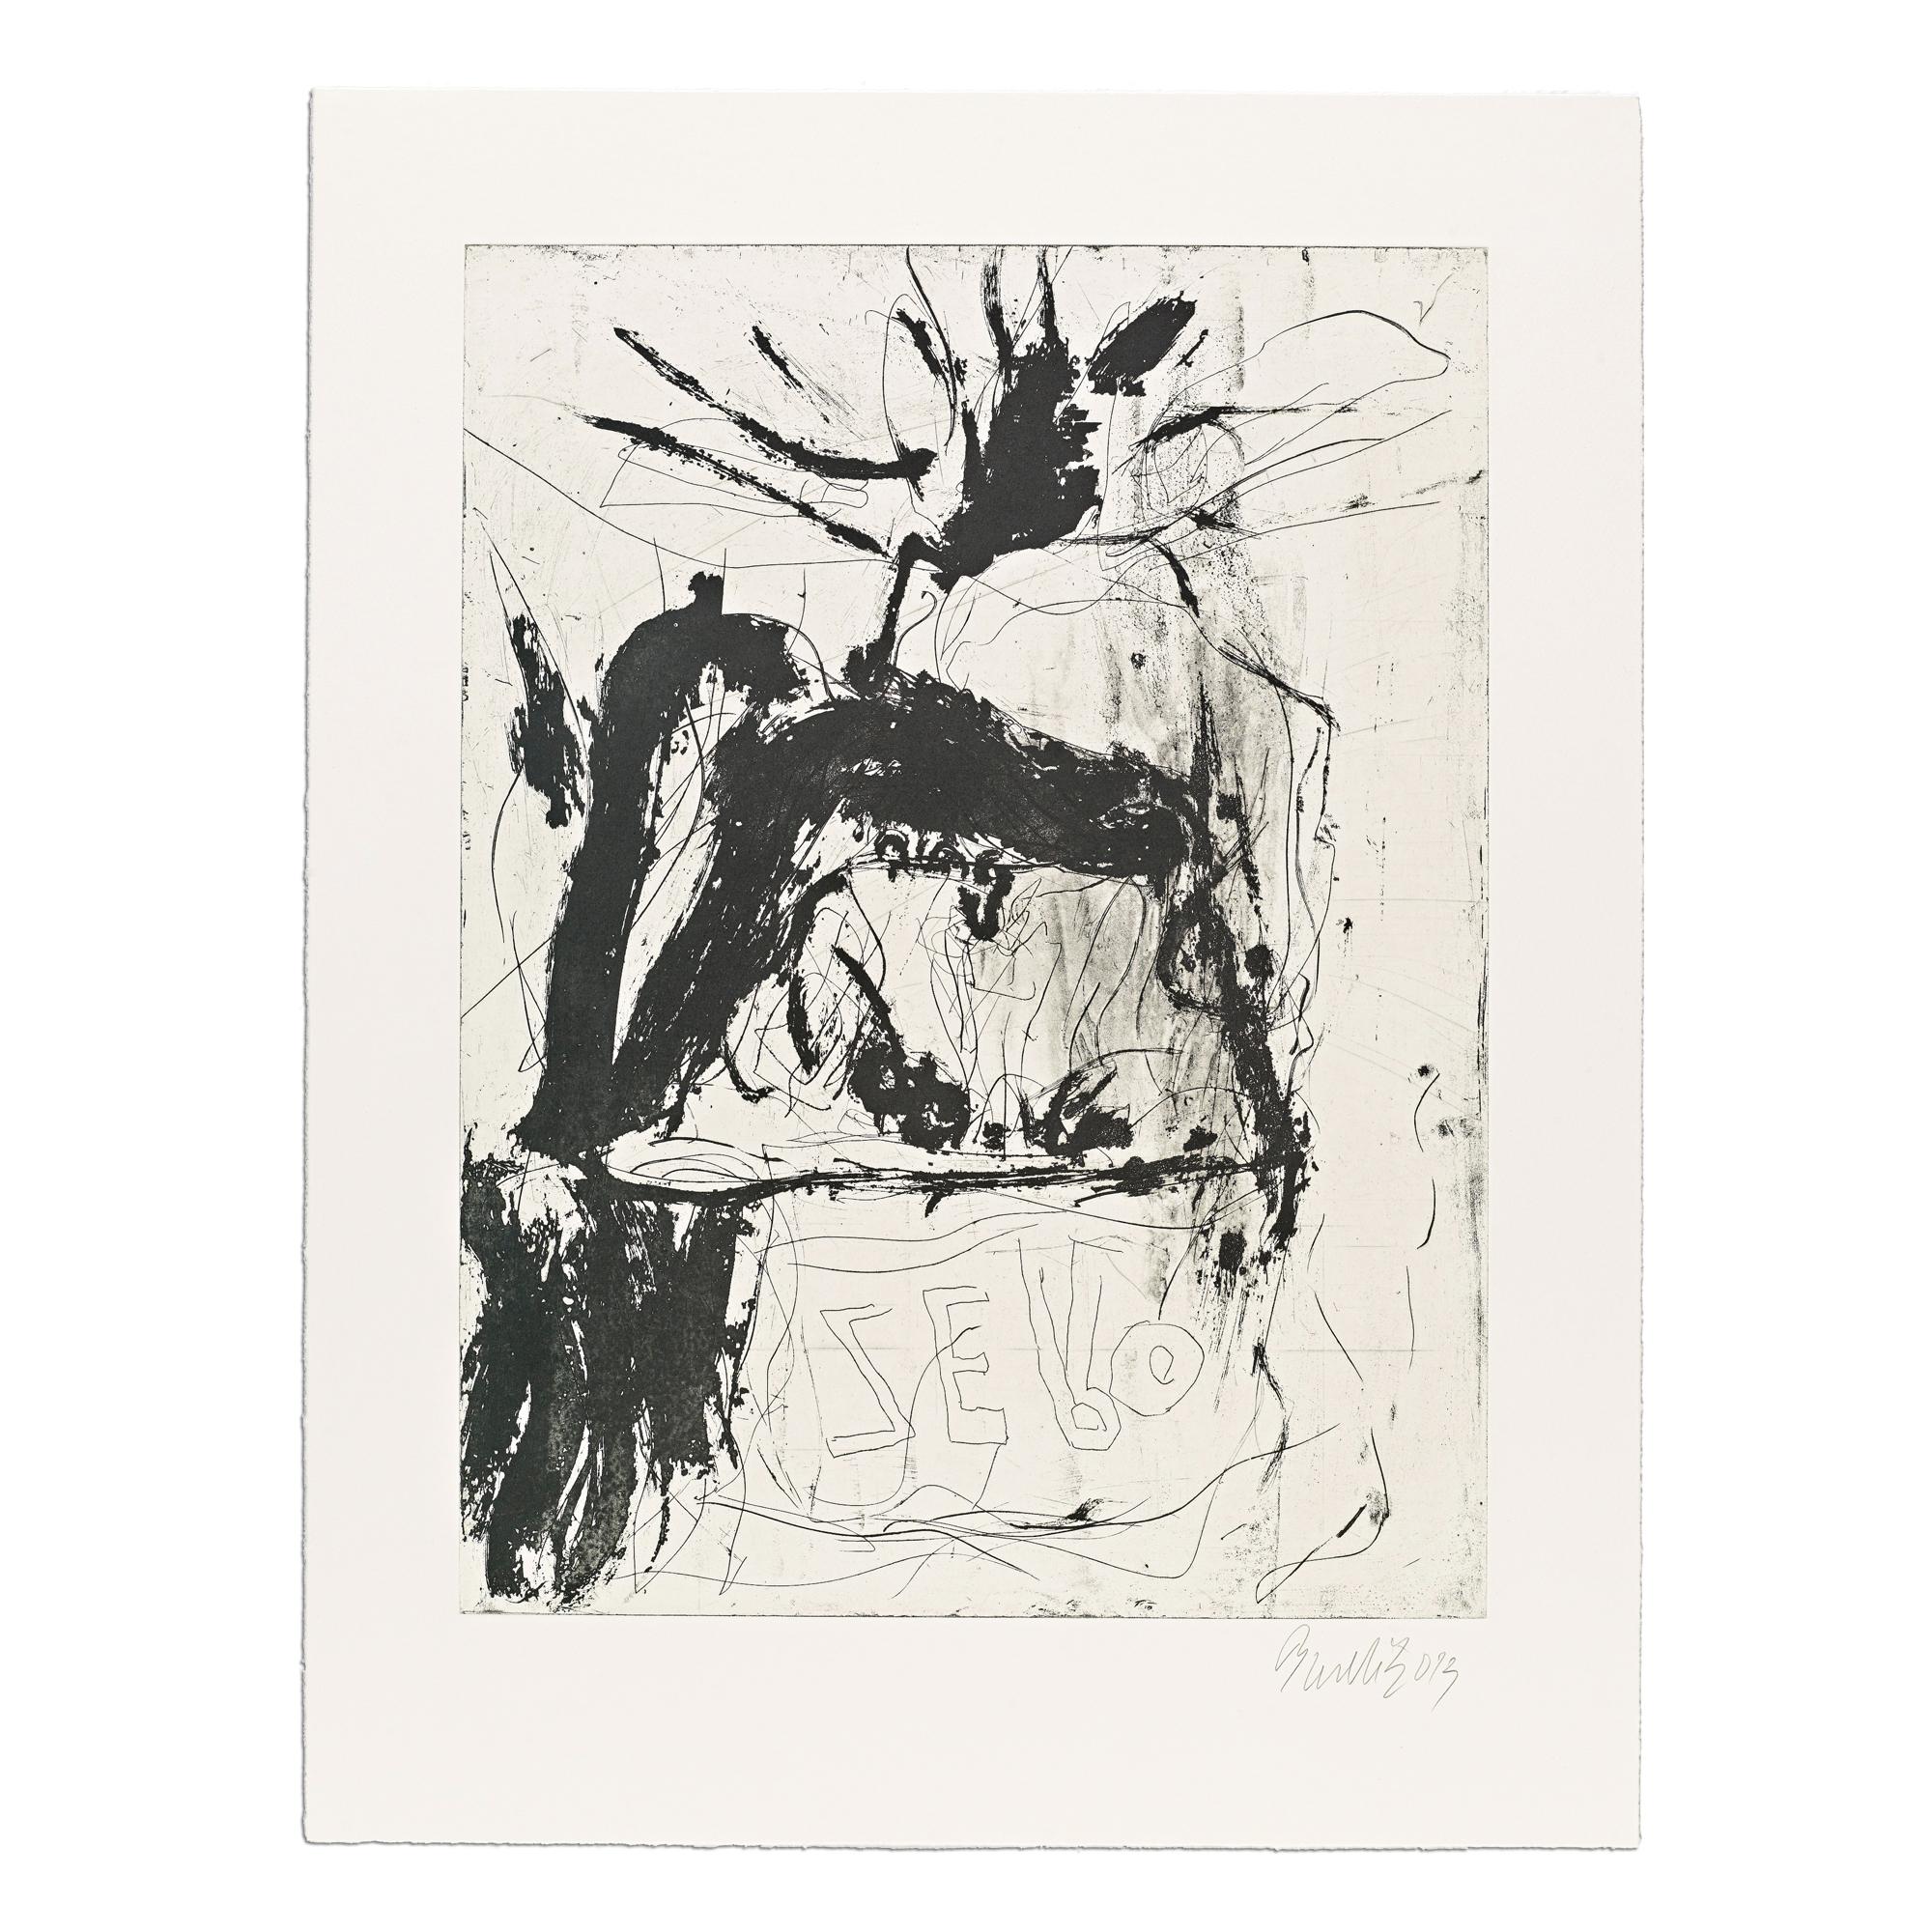 Georg Baselitz (German, b. 1938)
Untitled #7 (from Farewell Bill), 2013
Medium: Aquatint and line etching on wove paper
Dimensions: 85.1 x 64.9 cm
Edition of 15: Hand-signed and numbered
Condition: Excellent